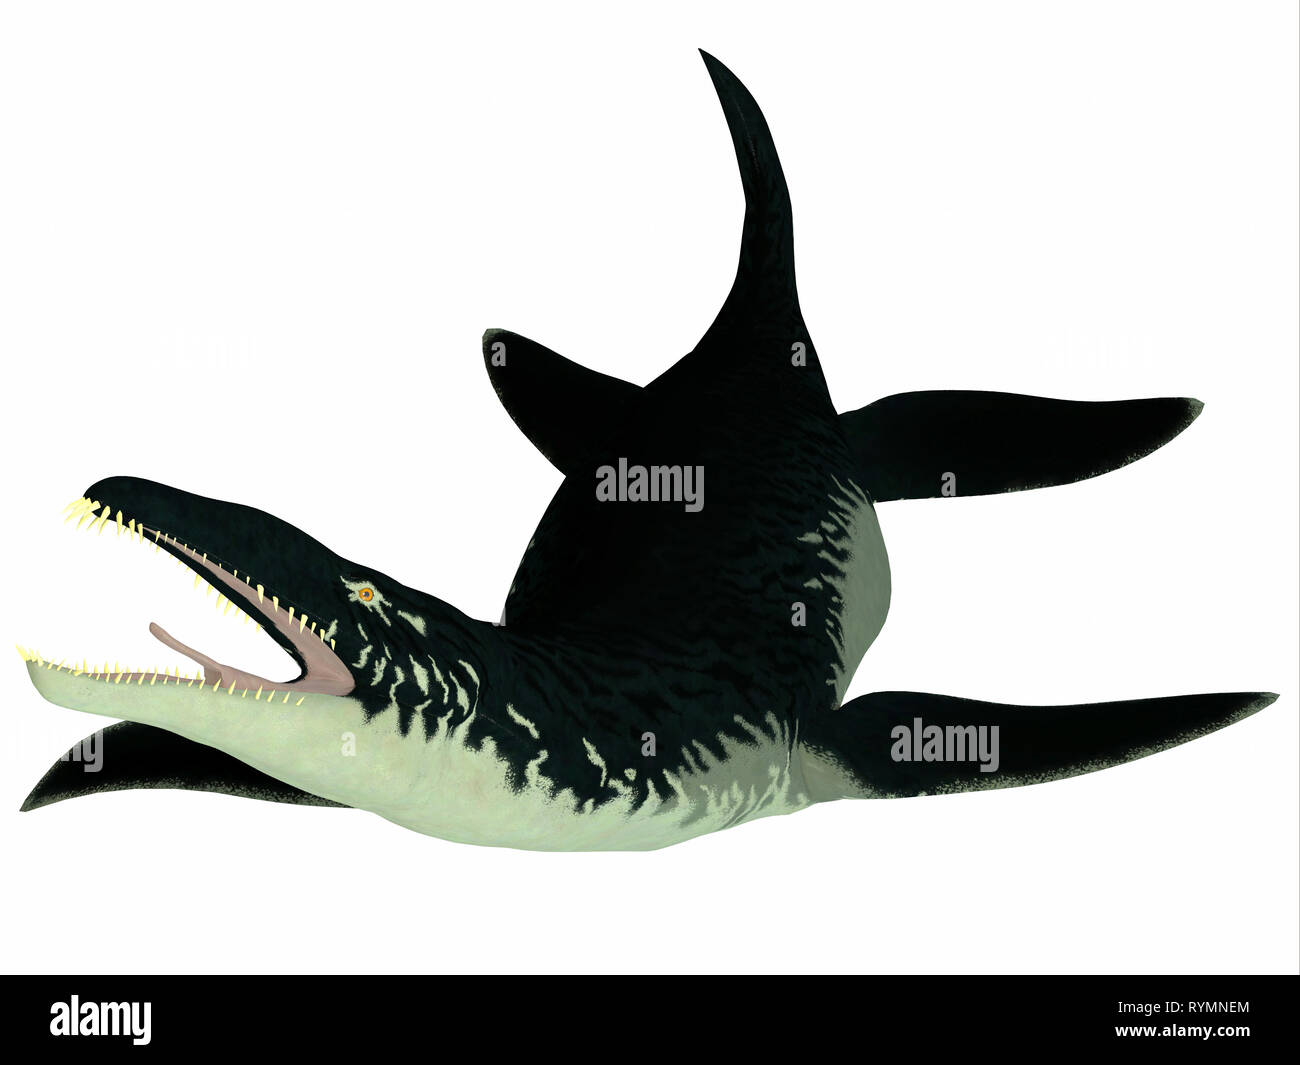 Liopleurodon Reptile on White - Liopleurodon was a Plesiosaur marine reptile that lived during the Jurassic Period of England and France. Stock Photo